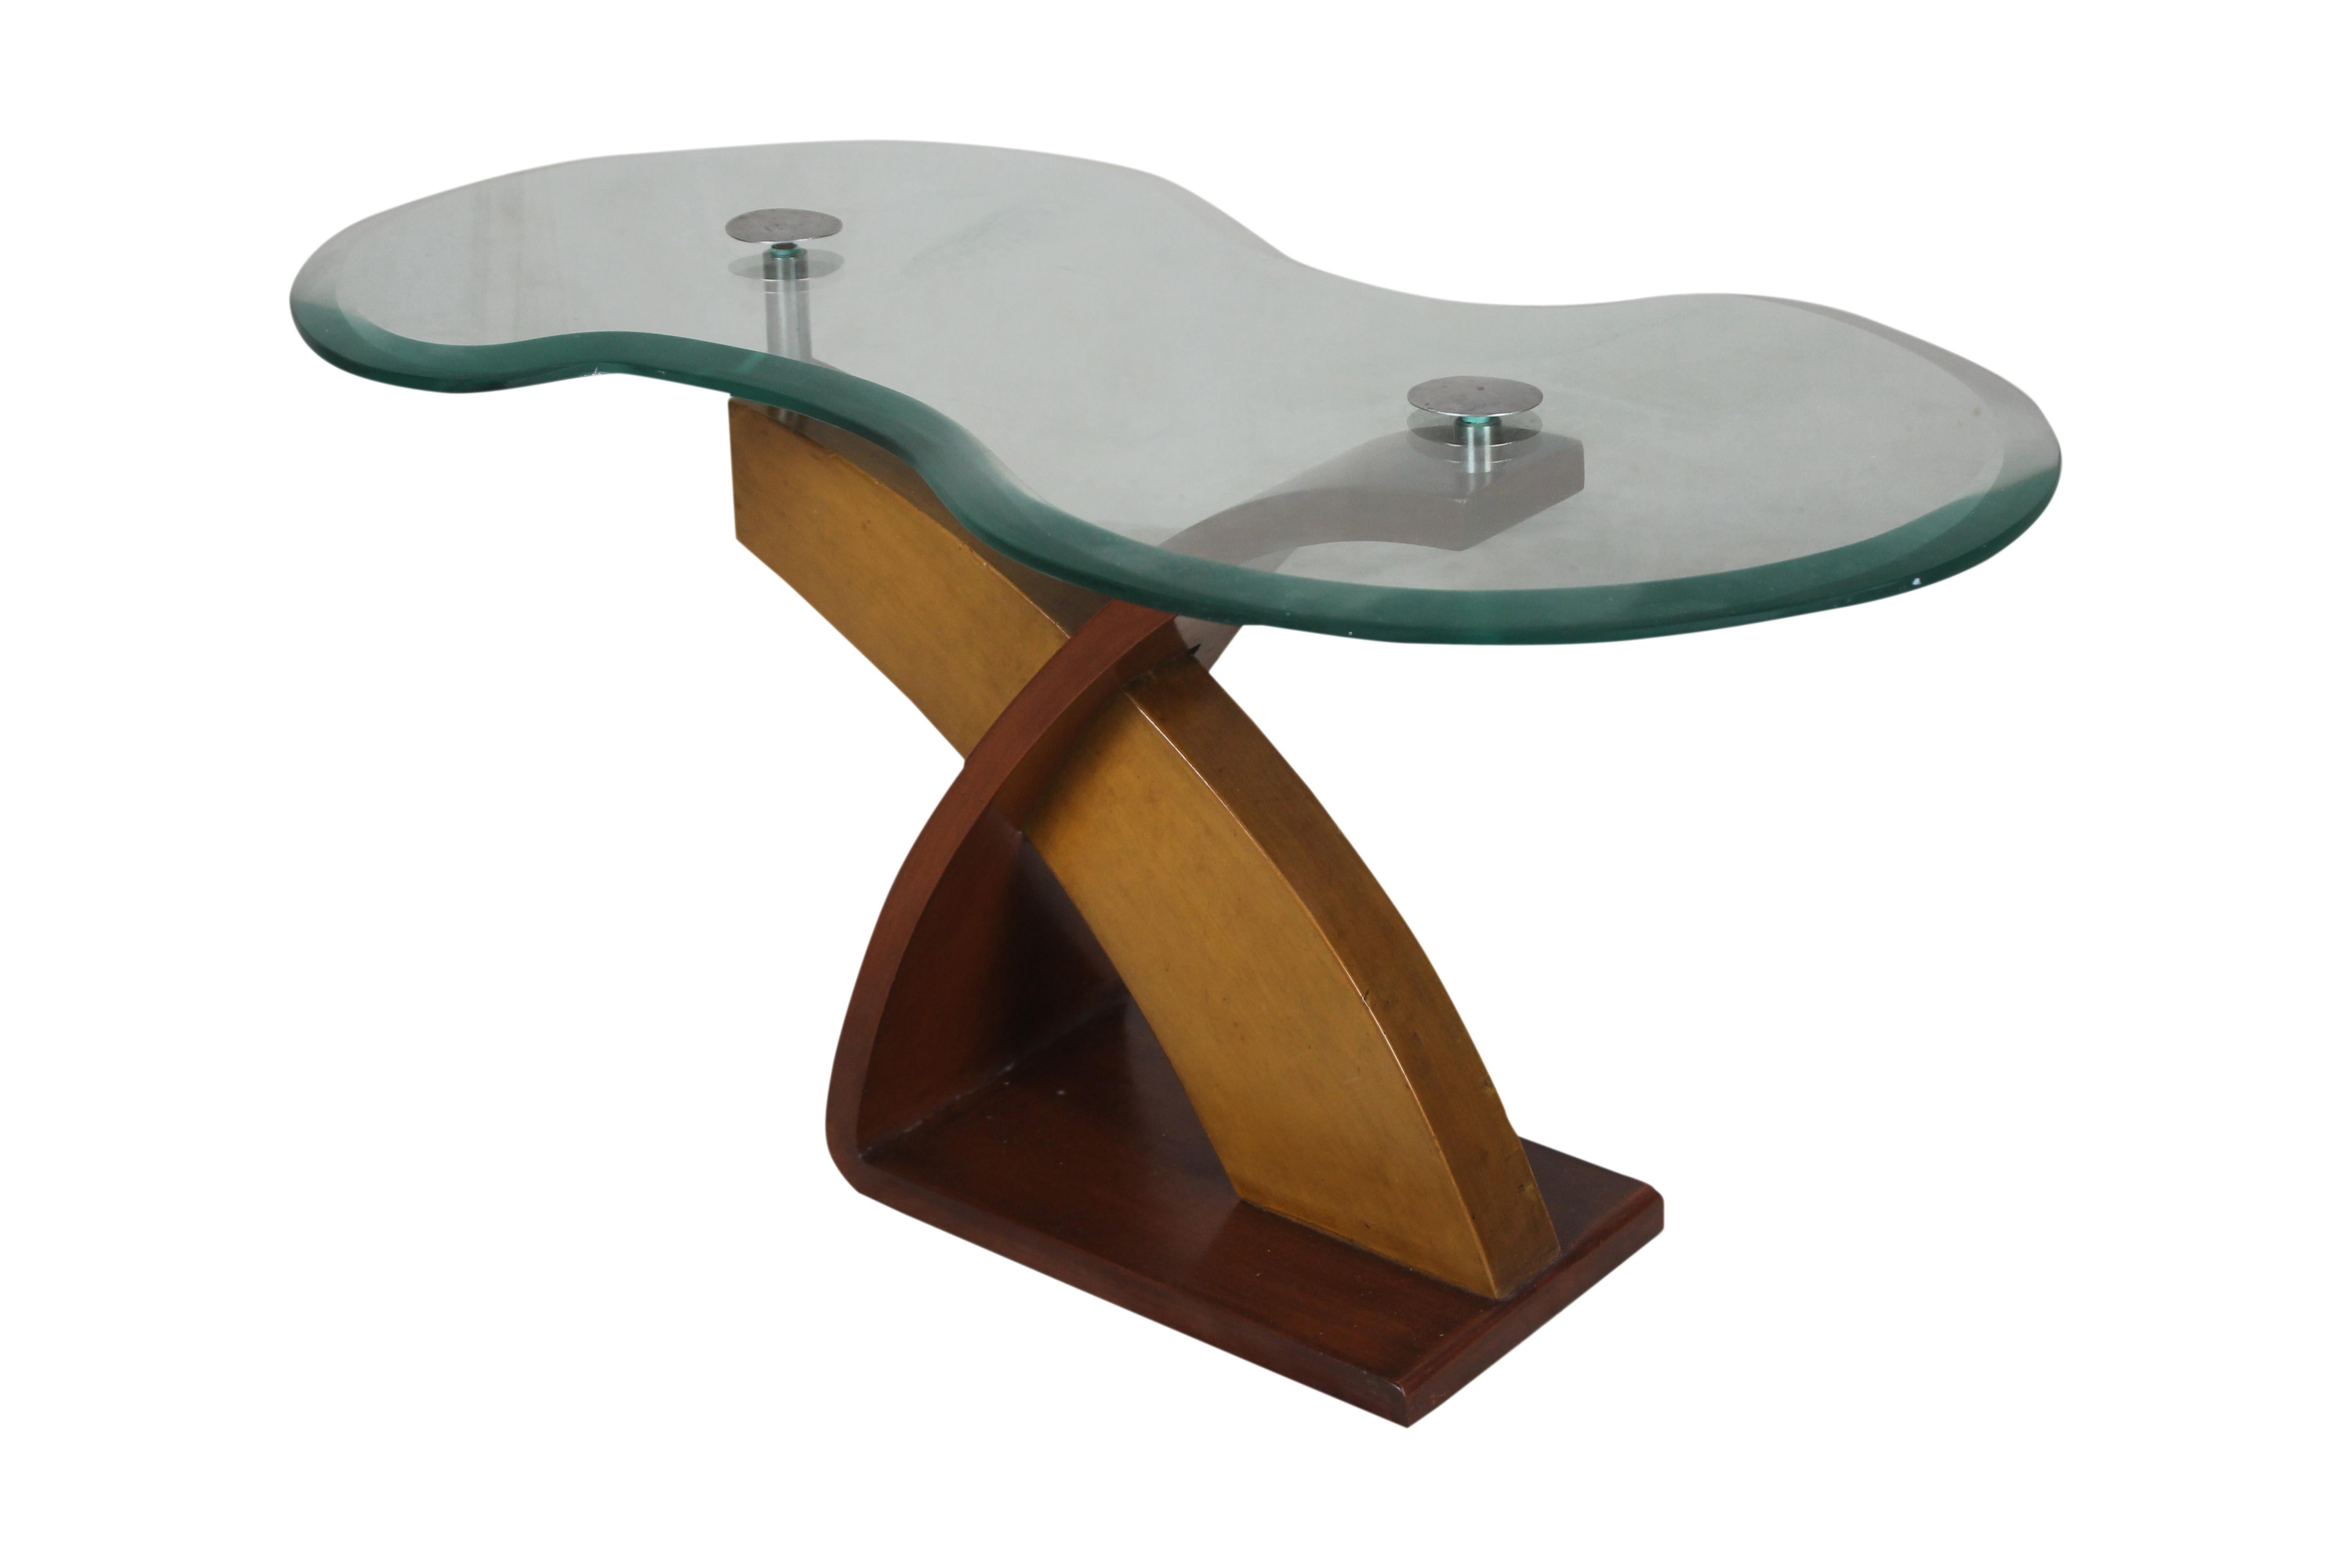 20th Century Mid-Century Modern Teak and Mahogany Side or Coffee Table with Beveled Glass